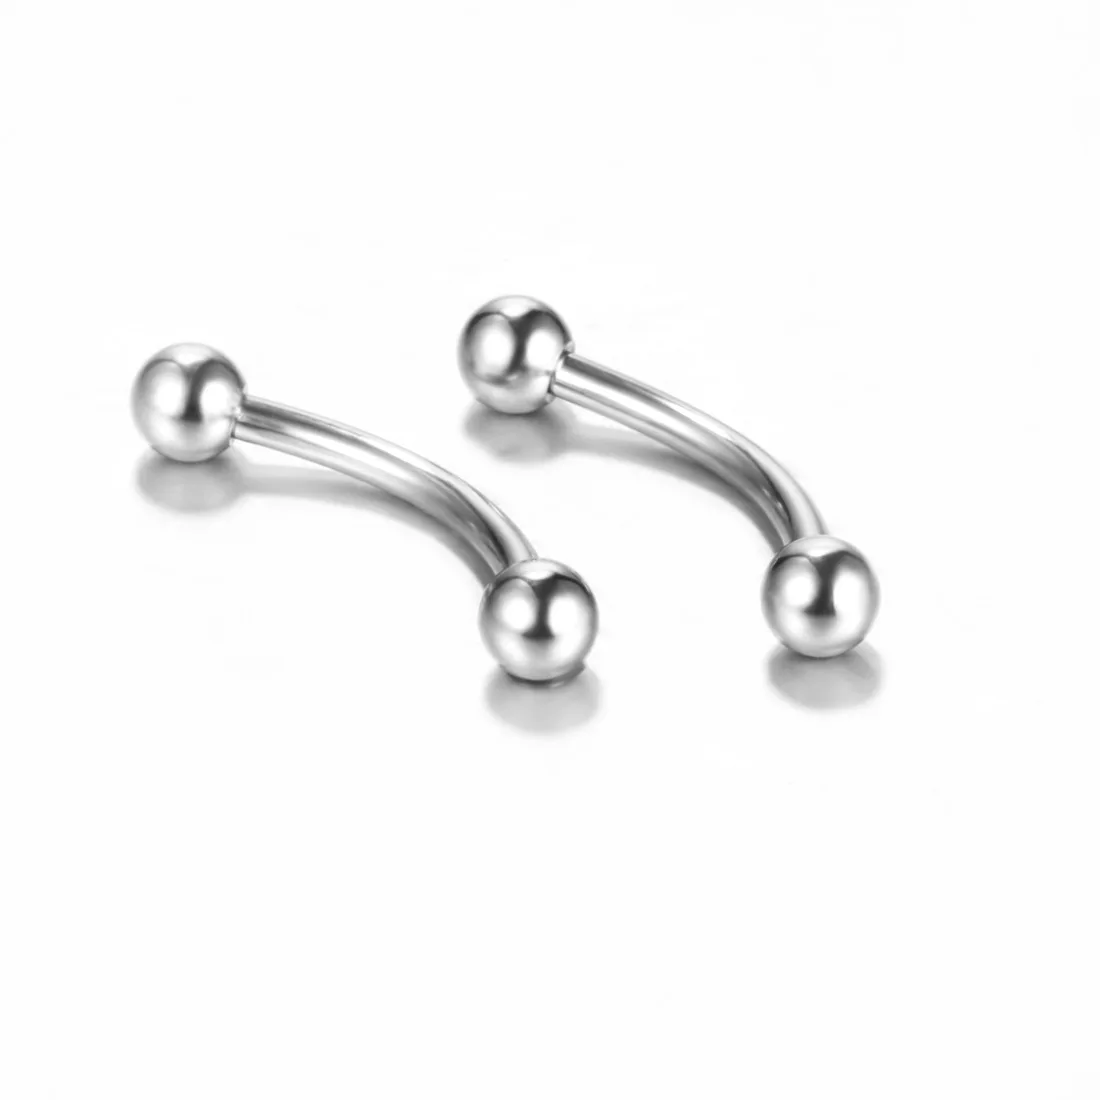 10PCS 16G Steel Curved Barbell Ball Banana Eyebrow Ear Rings Piercing Titanium Anodized Color for Body Jewelry | Украшения и